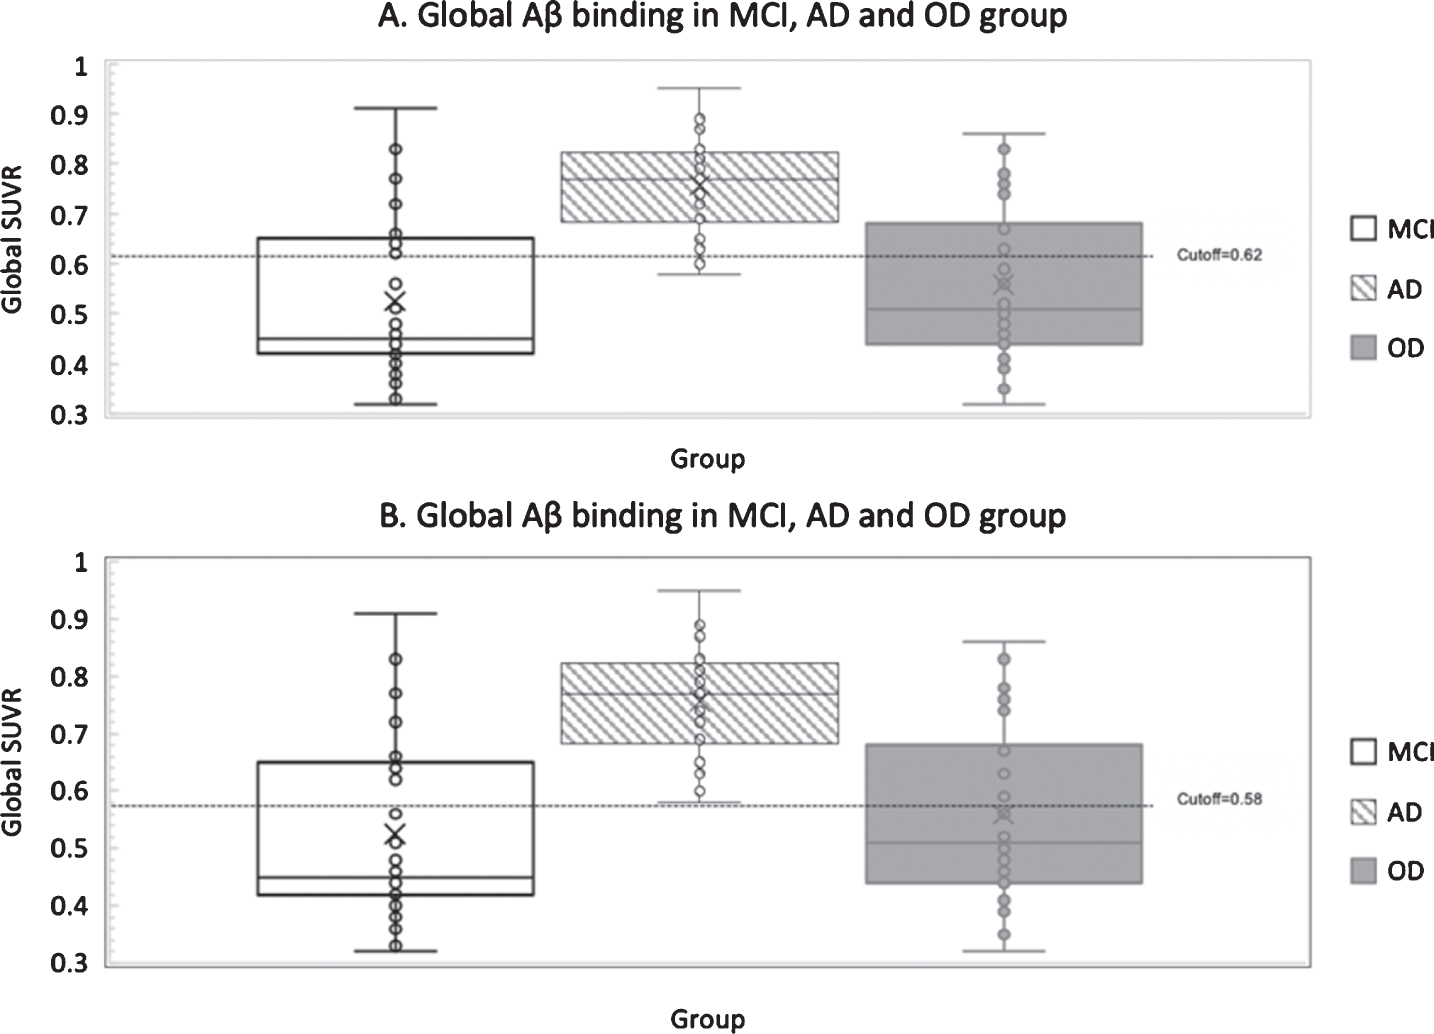 A) mean global Aβ binding in MCI, AD, and OD groups with given threshold (0.62); B) mean global Aβ binding in MCI, AD, and OD groups with calculated optimal cut off (0.58).